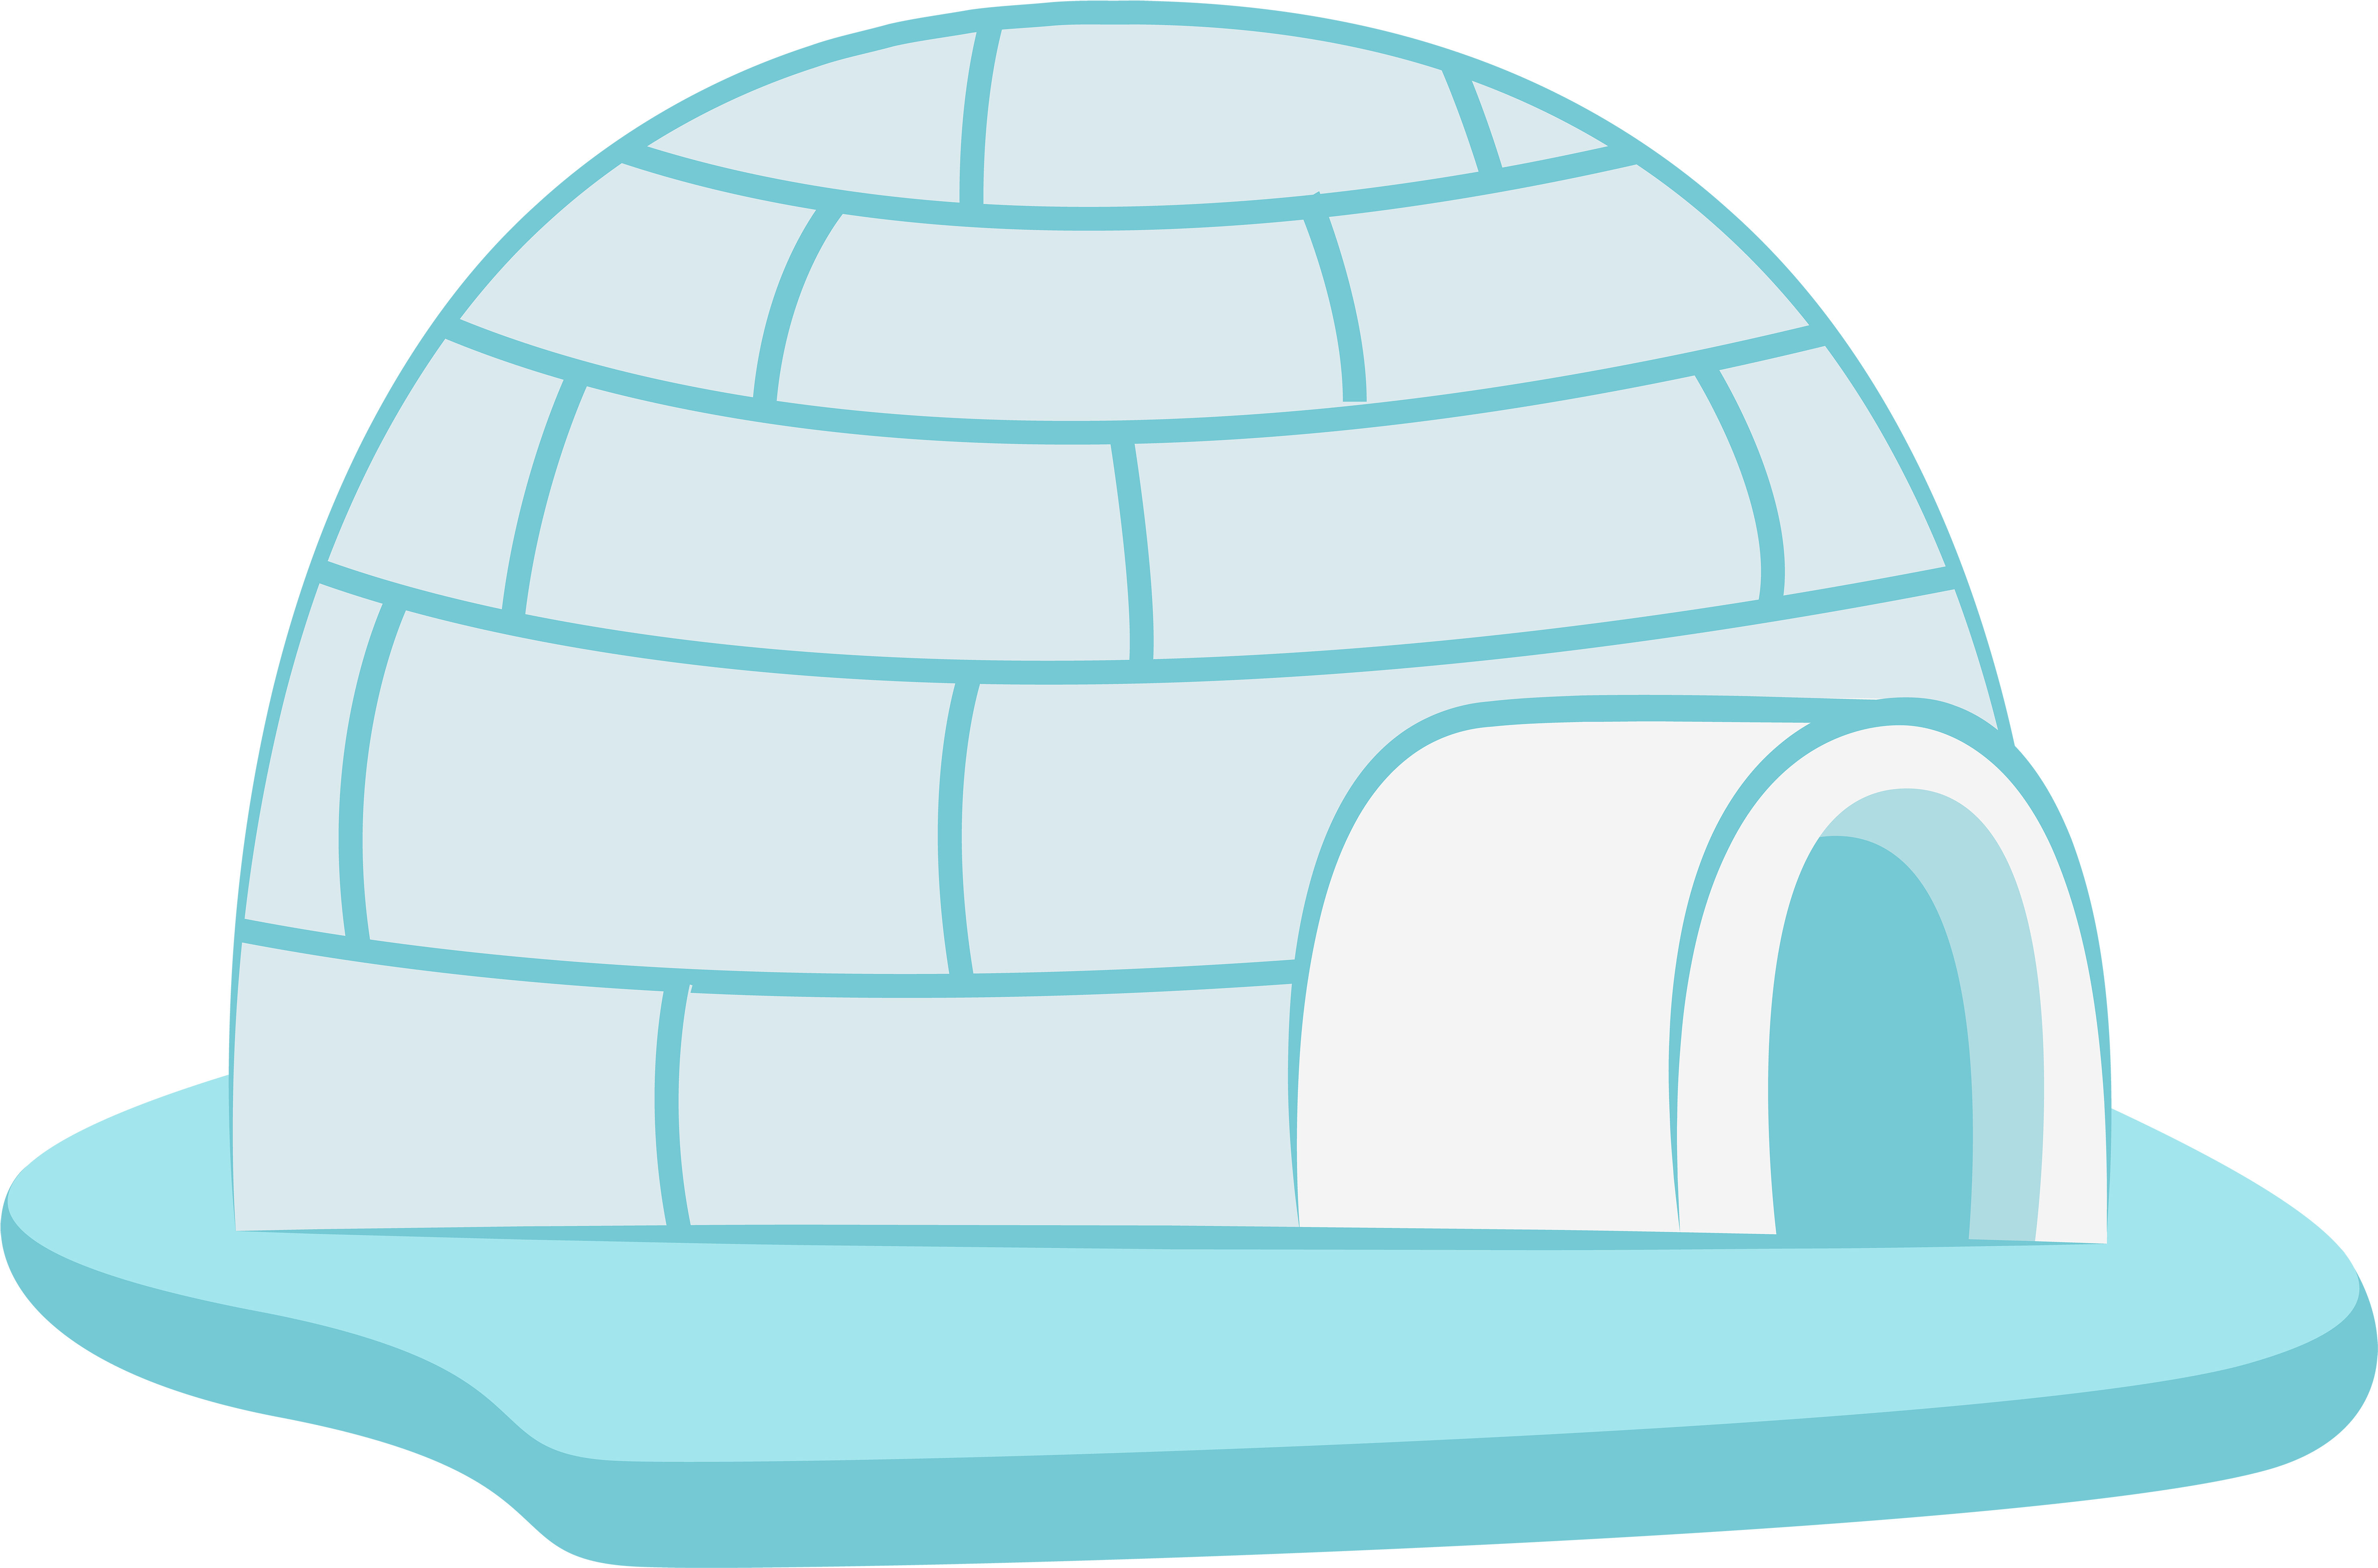 Icehouse Transparent Png Clip Art Image - Igloo Clipart Png.